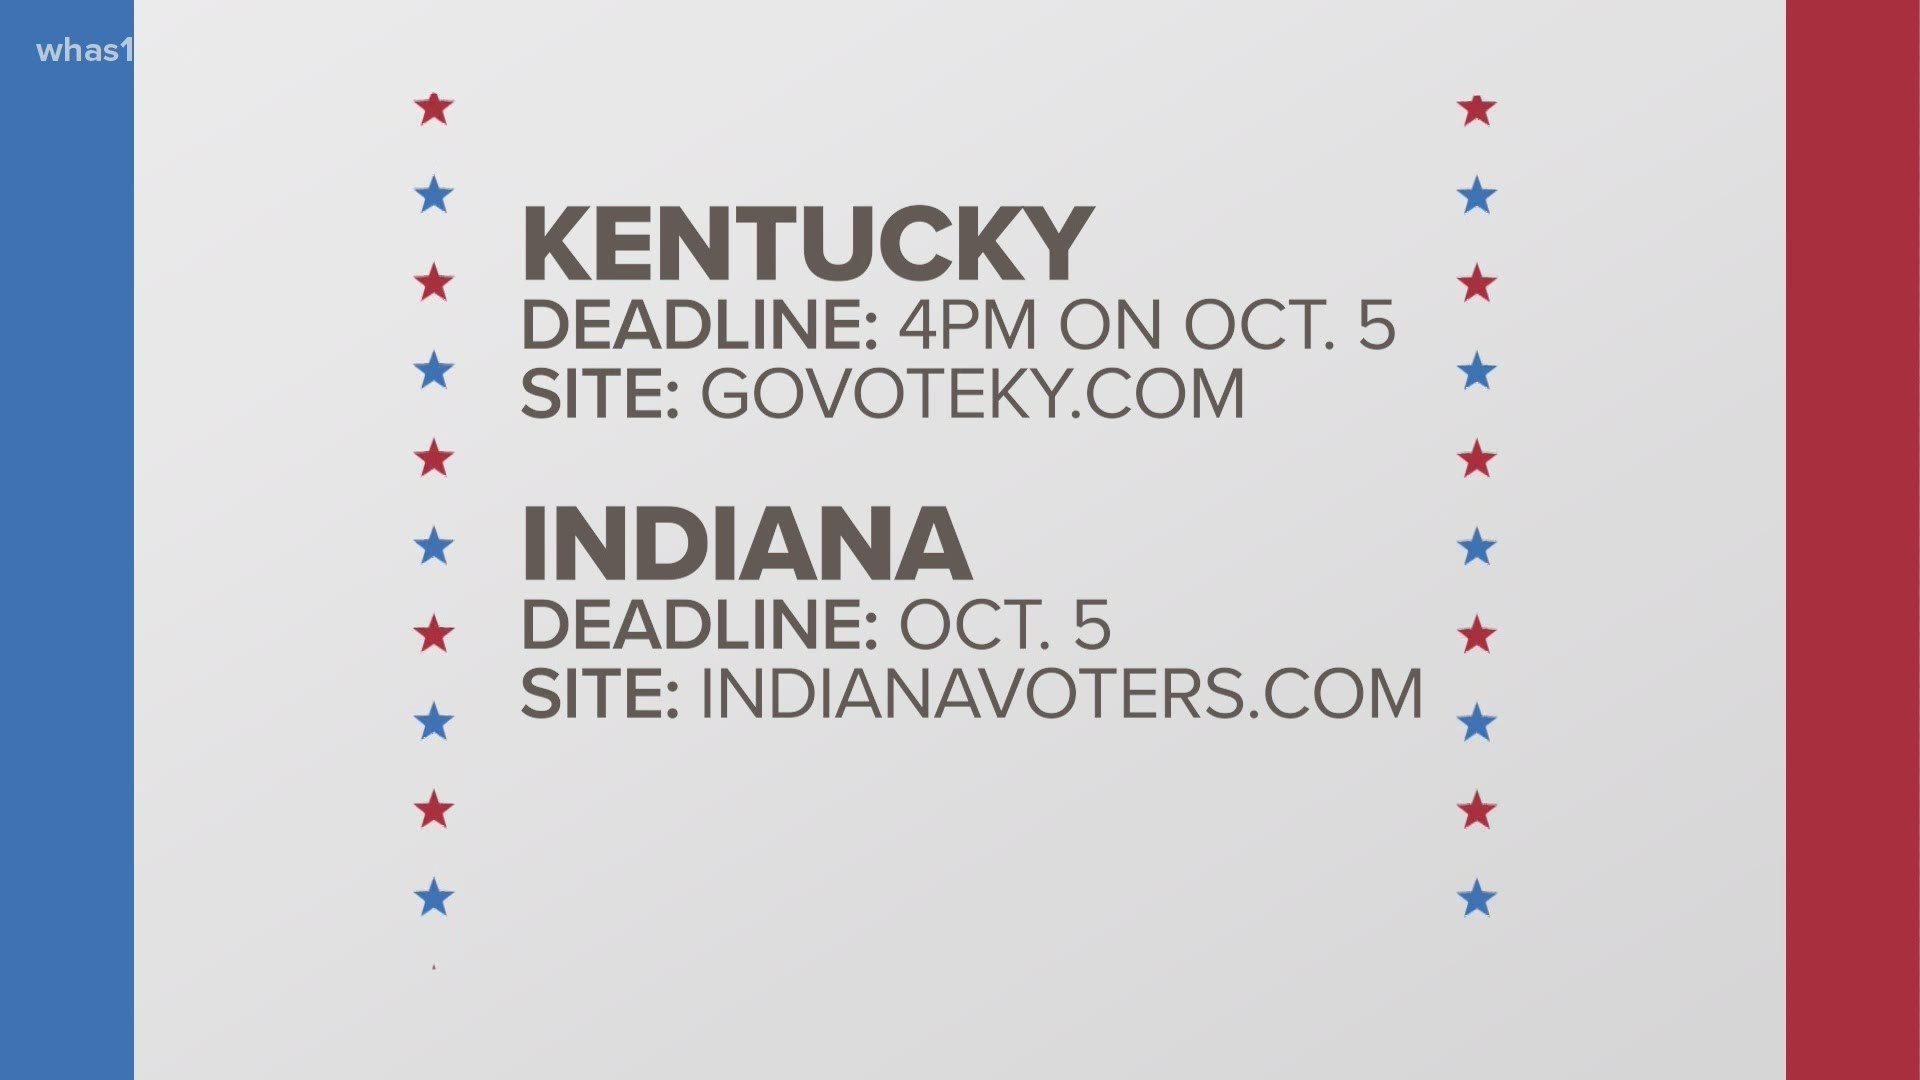 Oct. 5 is the voter registration deadline for both Kentucky and Indiana.